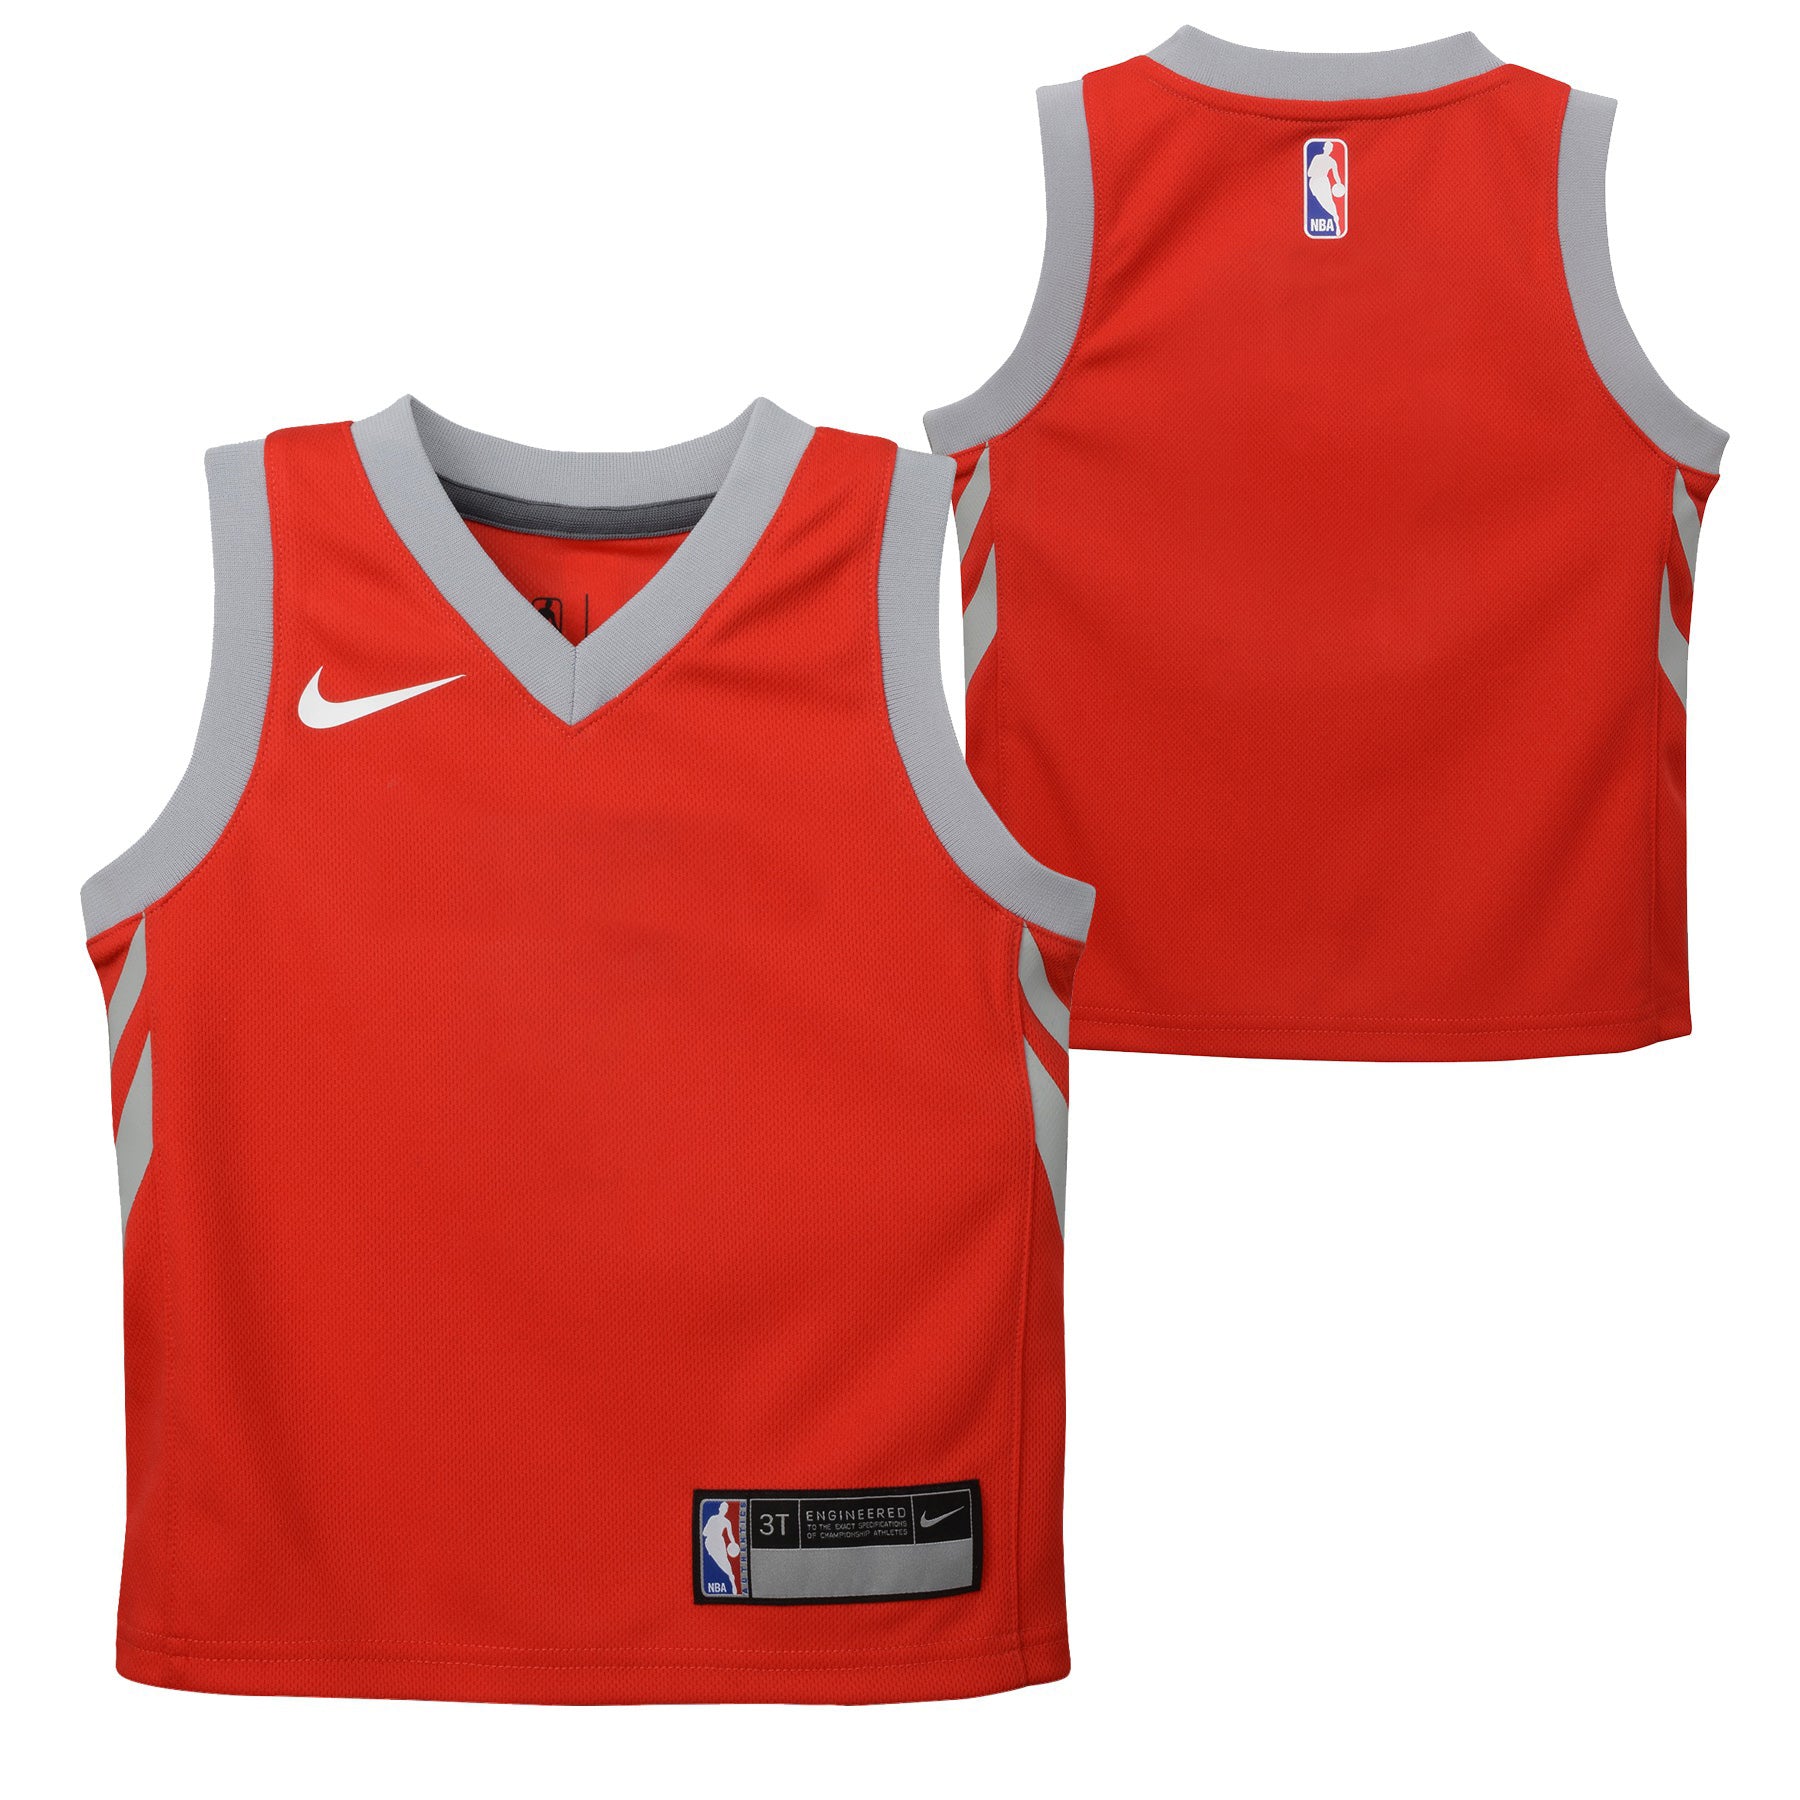  NBA Kids 4-7 Official Name and Number Replica Home